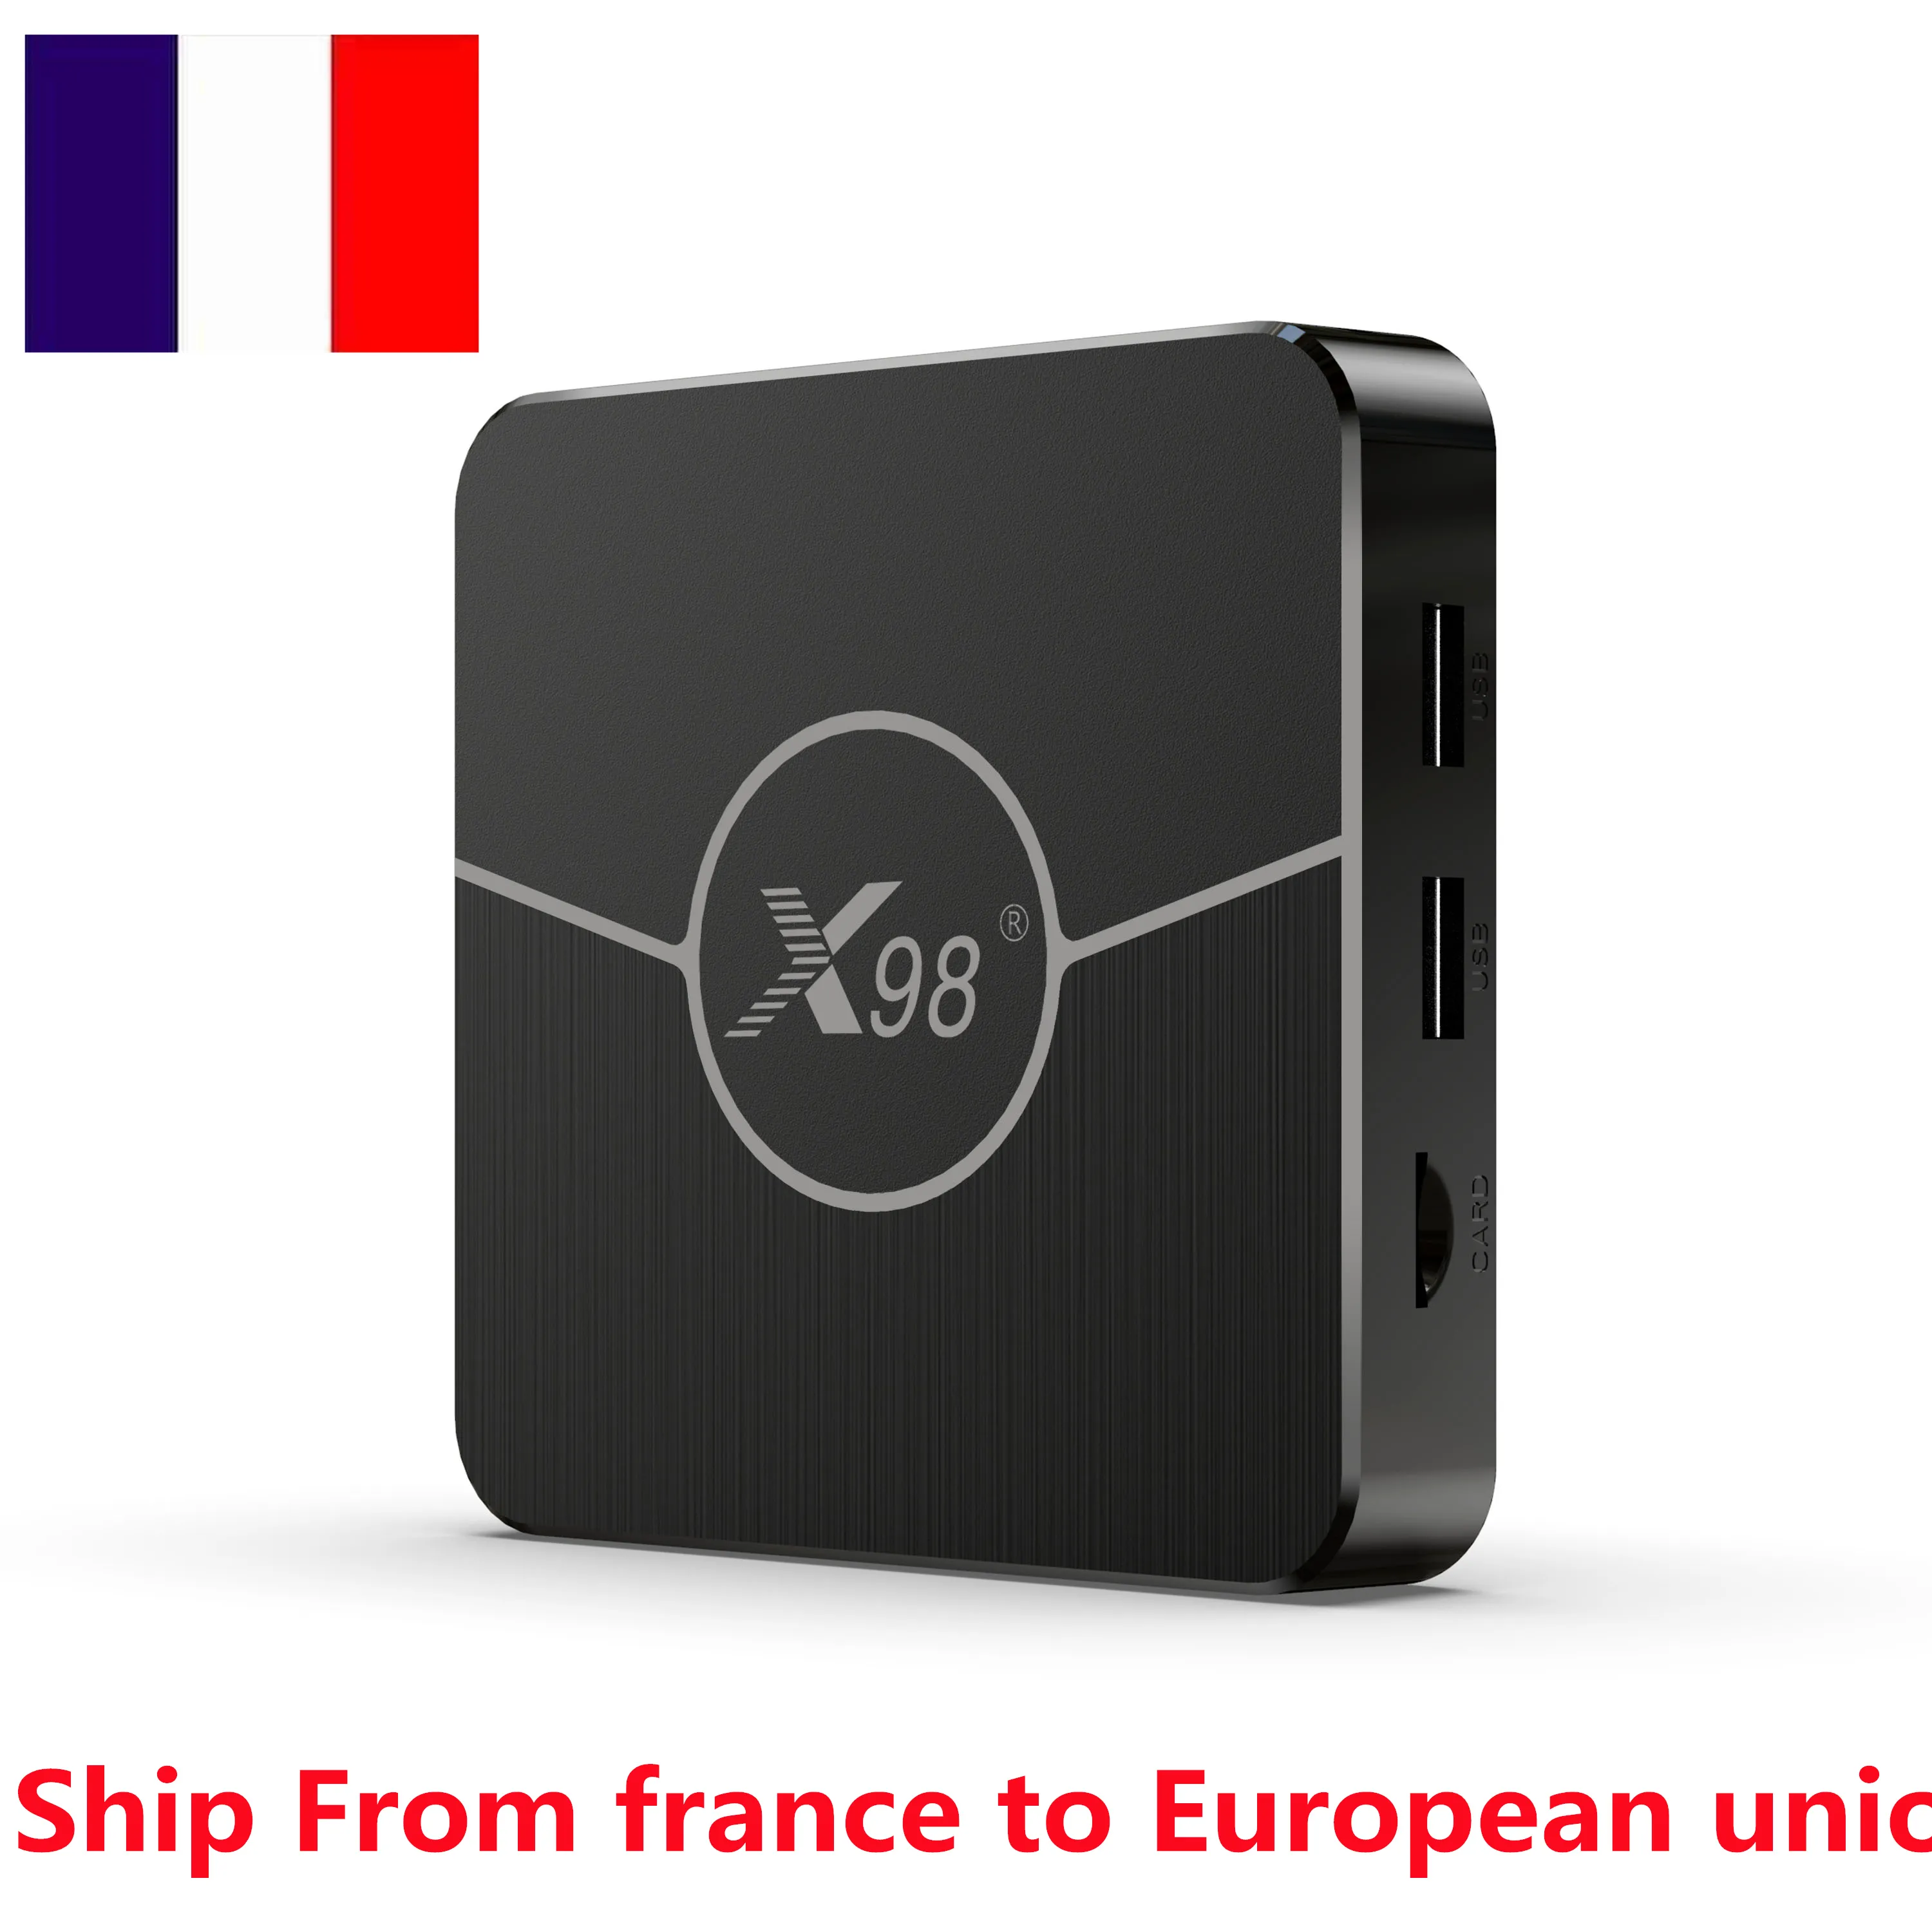 France in-stock X98 Plus TV BOX Android11 Amlogic S905W2 2GB RAM 16GB Wifi 2.4G 5G 4K AV1 Media Player Set Top Box